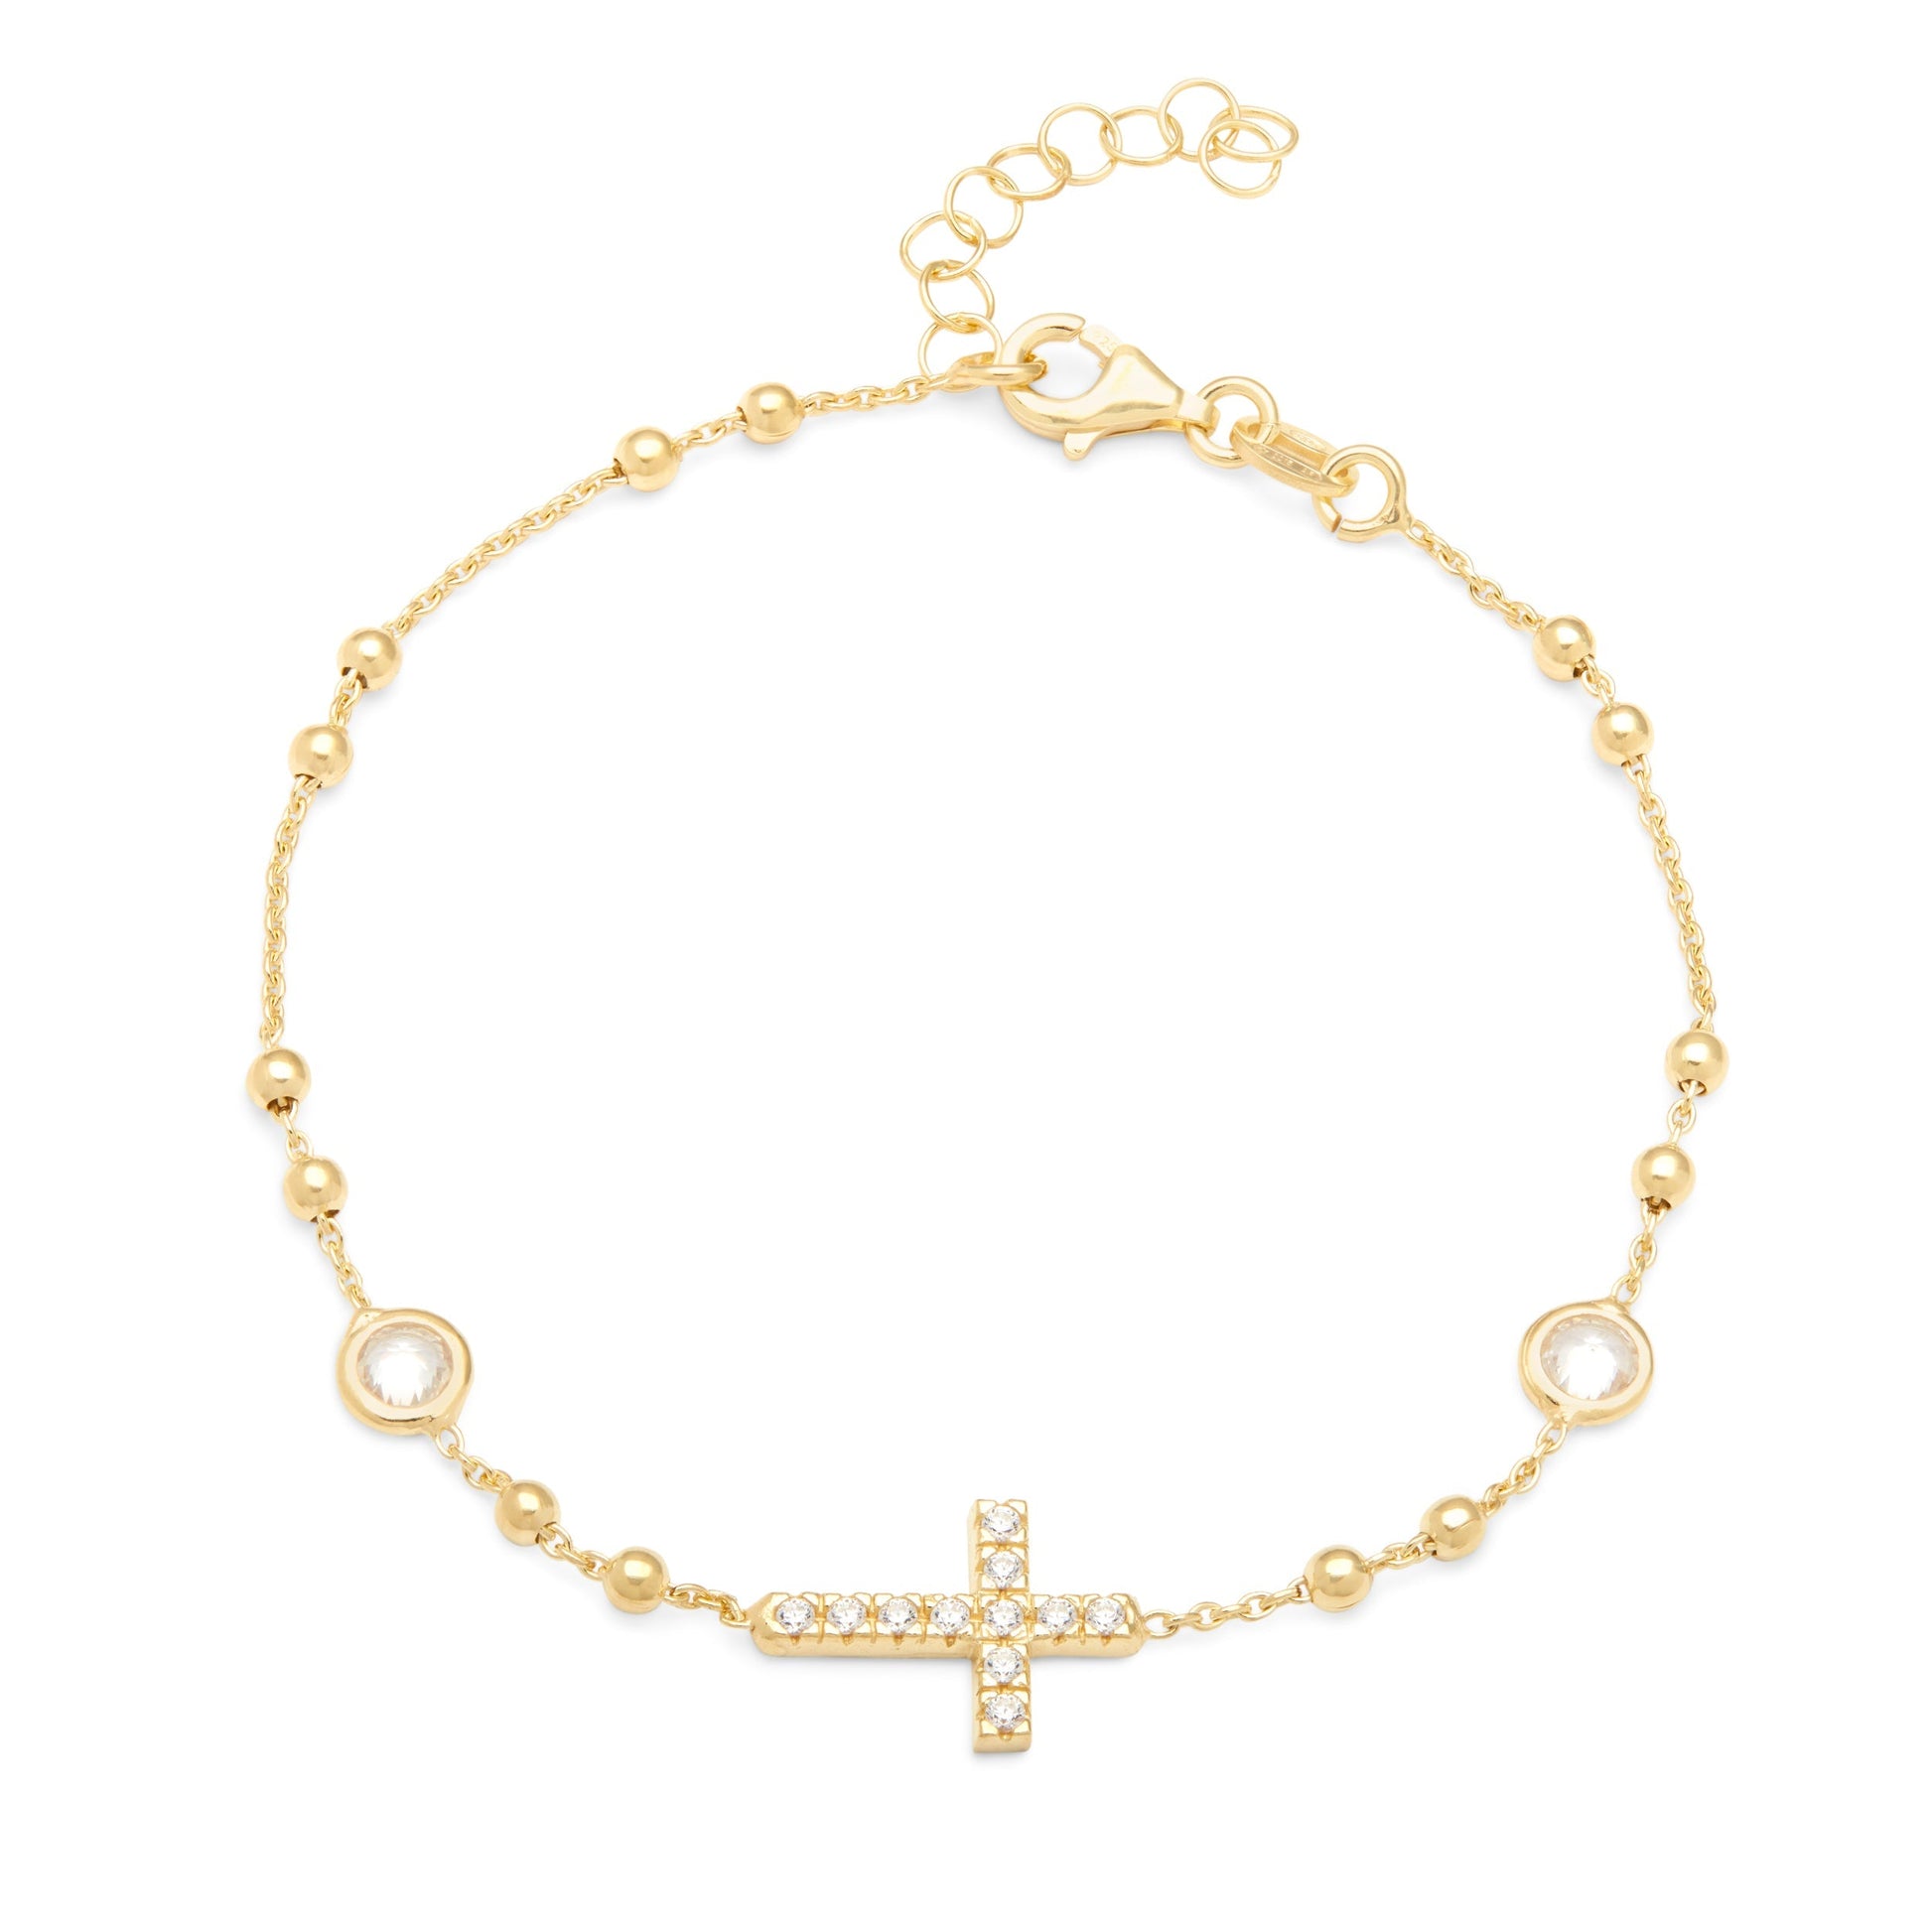 Mondo Cattolico Bracelet Gold-plated Sterling Silver Rosary Bracelet With Cross and Cubic Zirconia Details